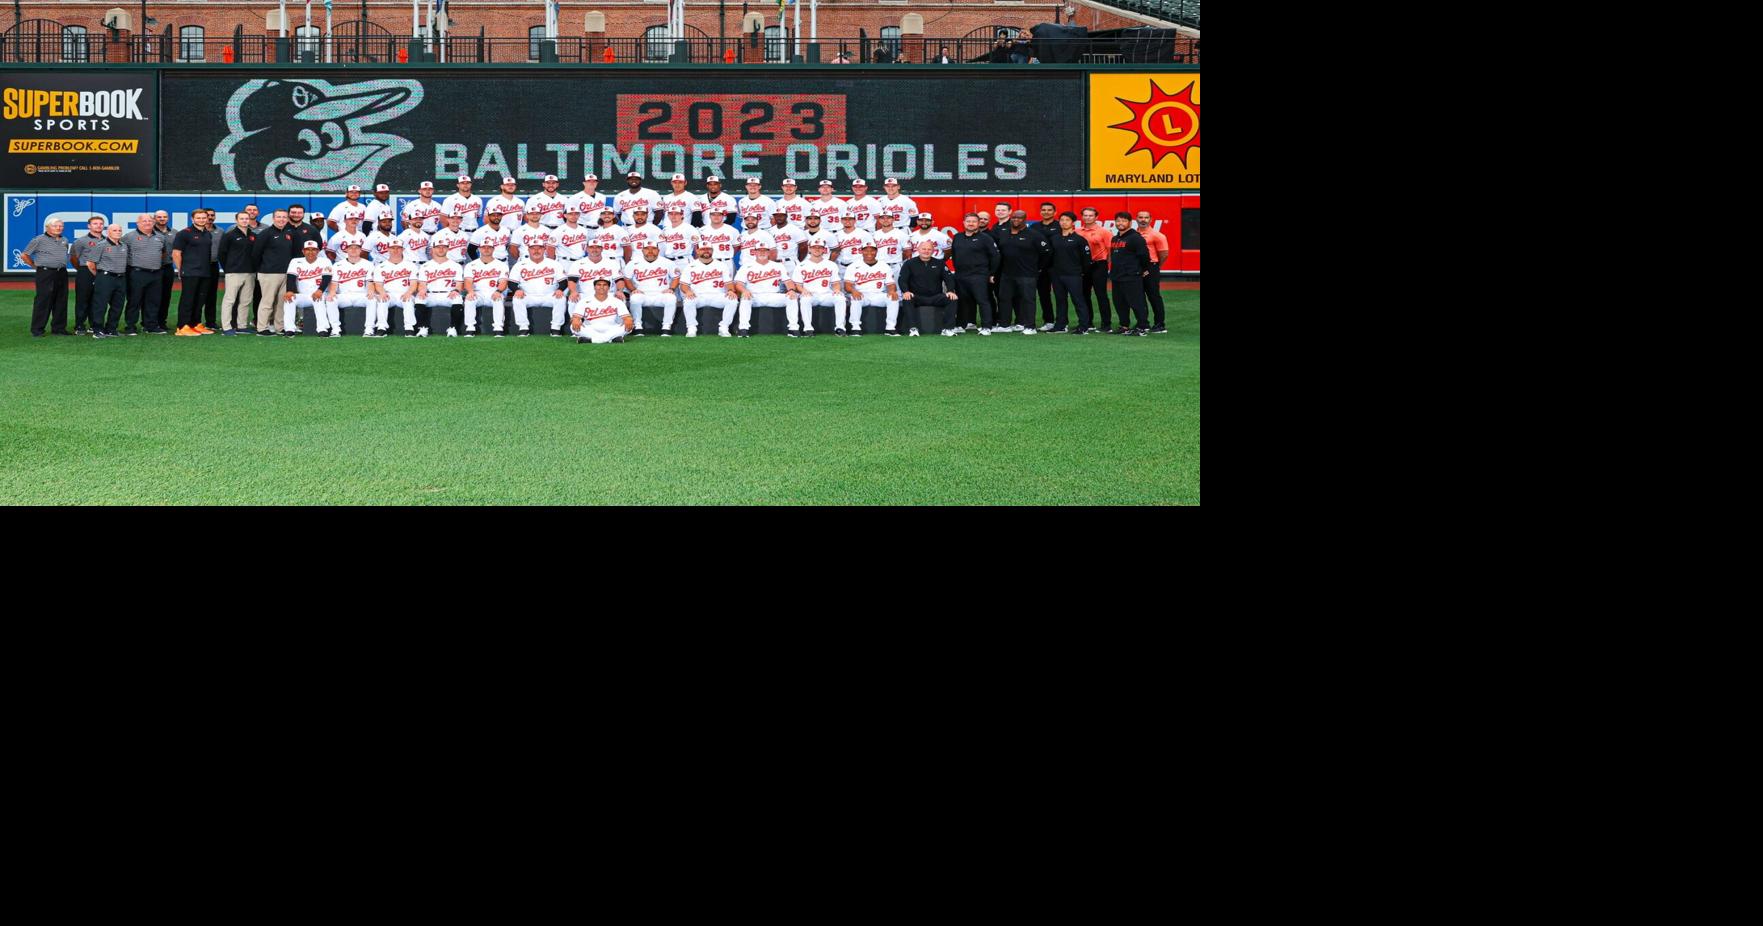 Rock-n-roll icon photobombs Orioles team picture, Sports